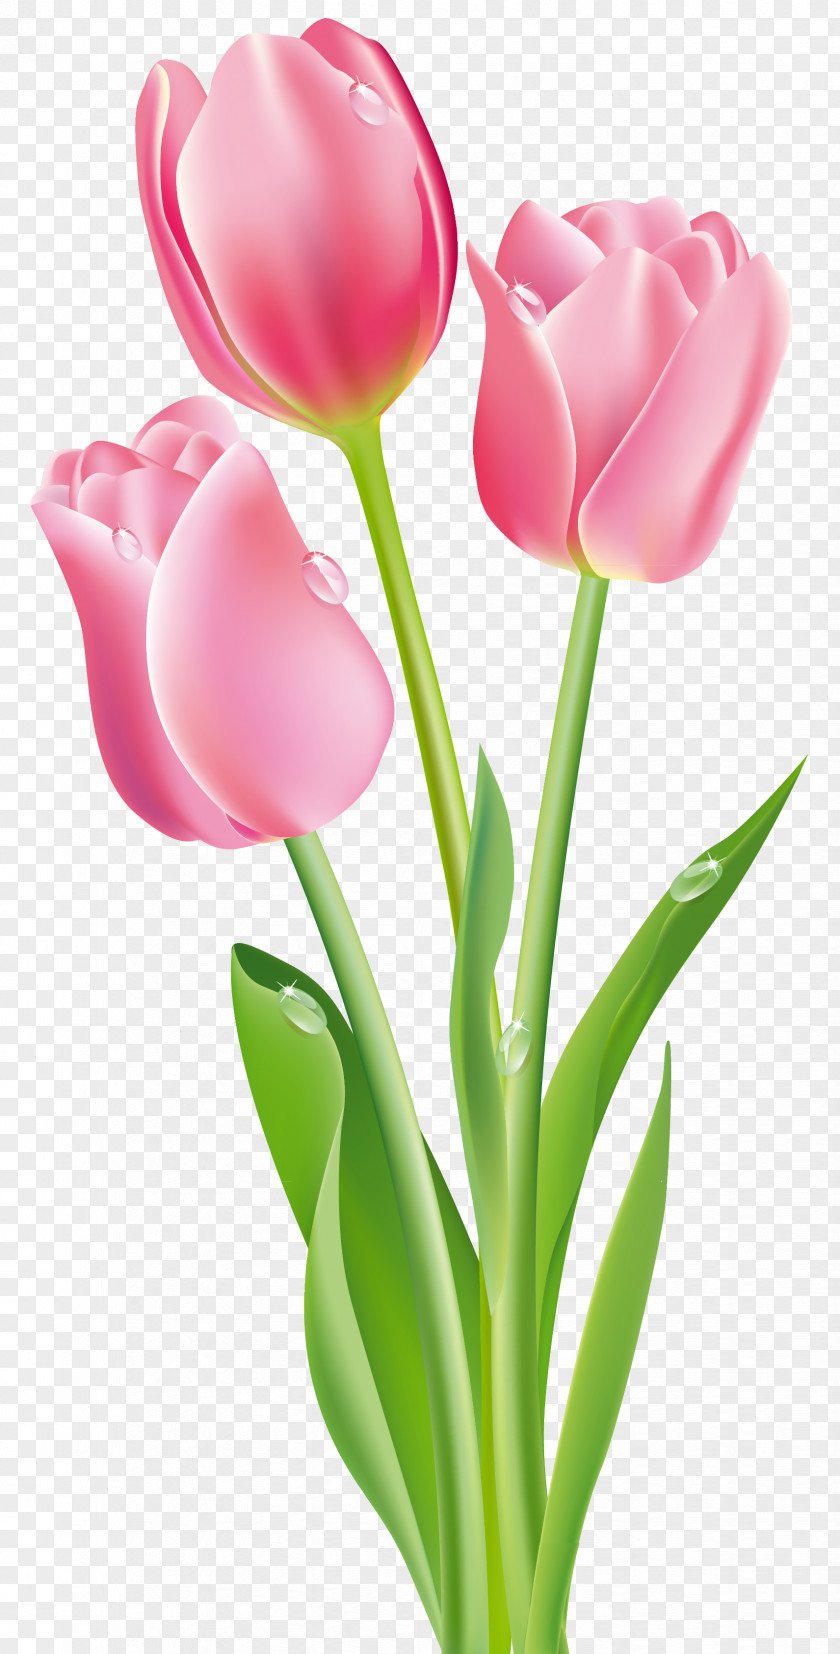 Pink Tulips Clipart Image Tulip Flower Clip Art PNG